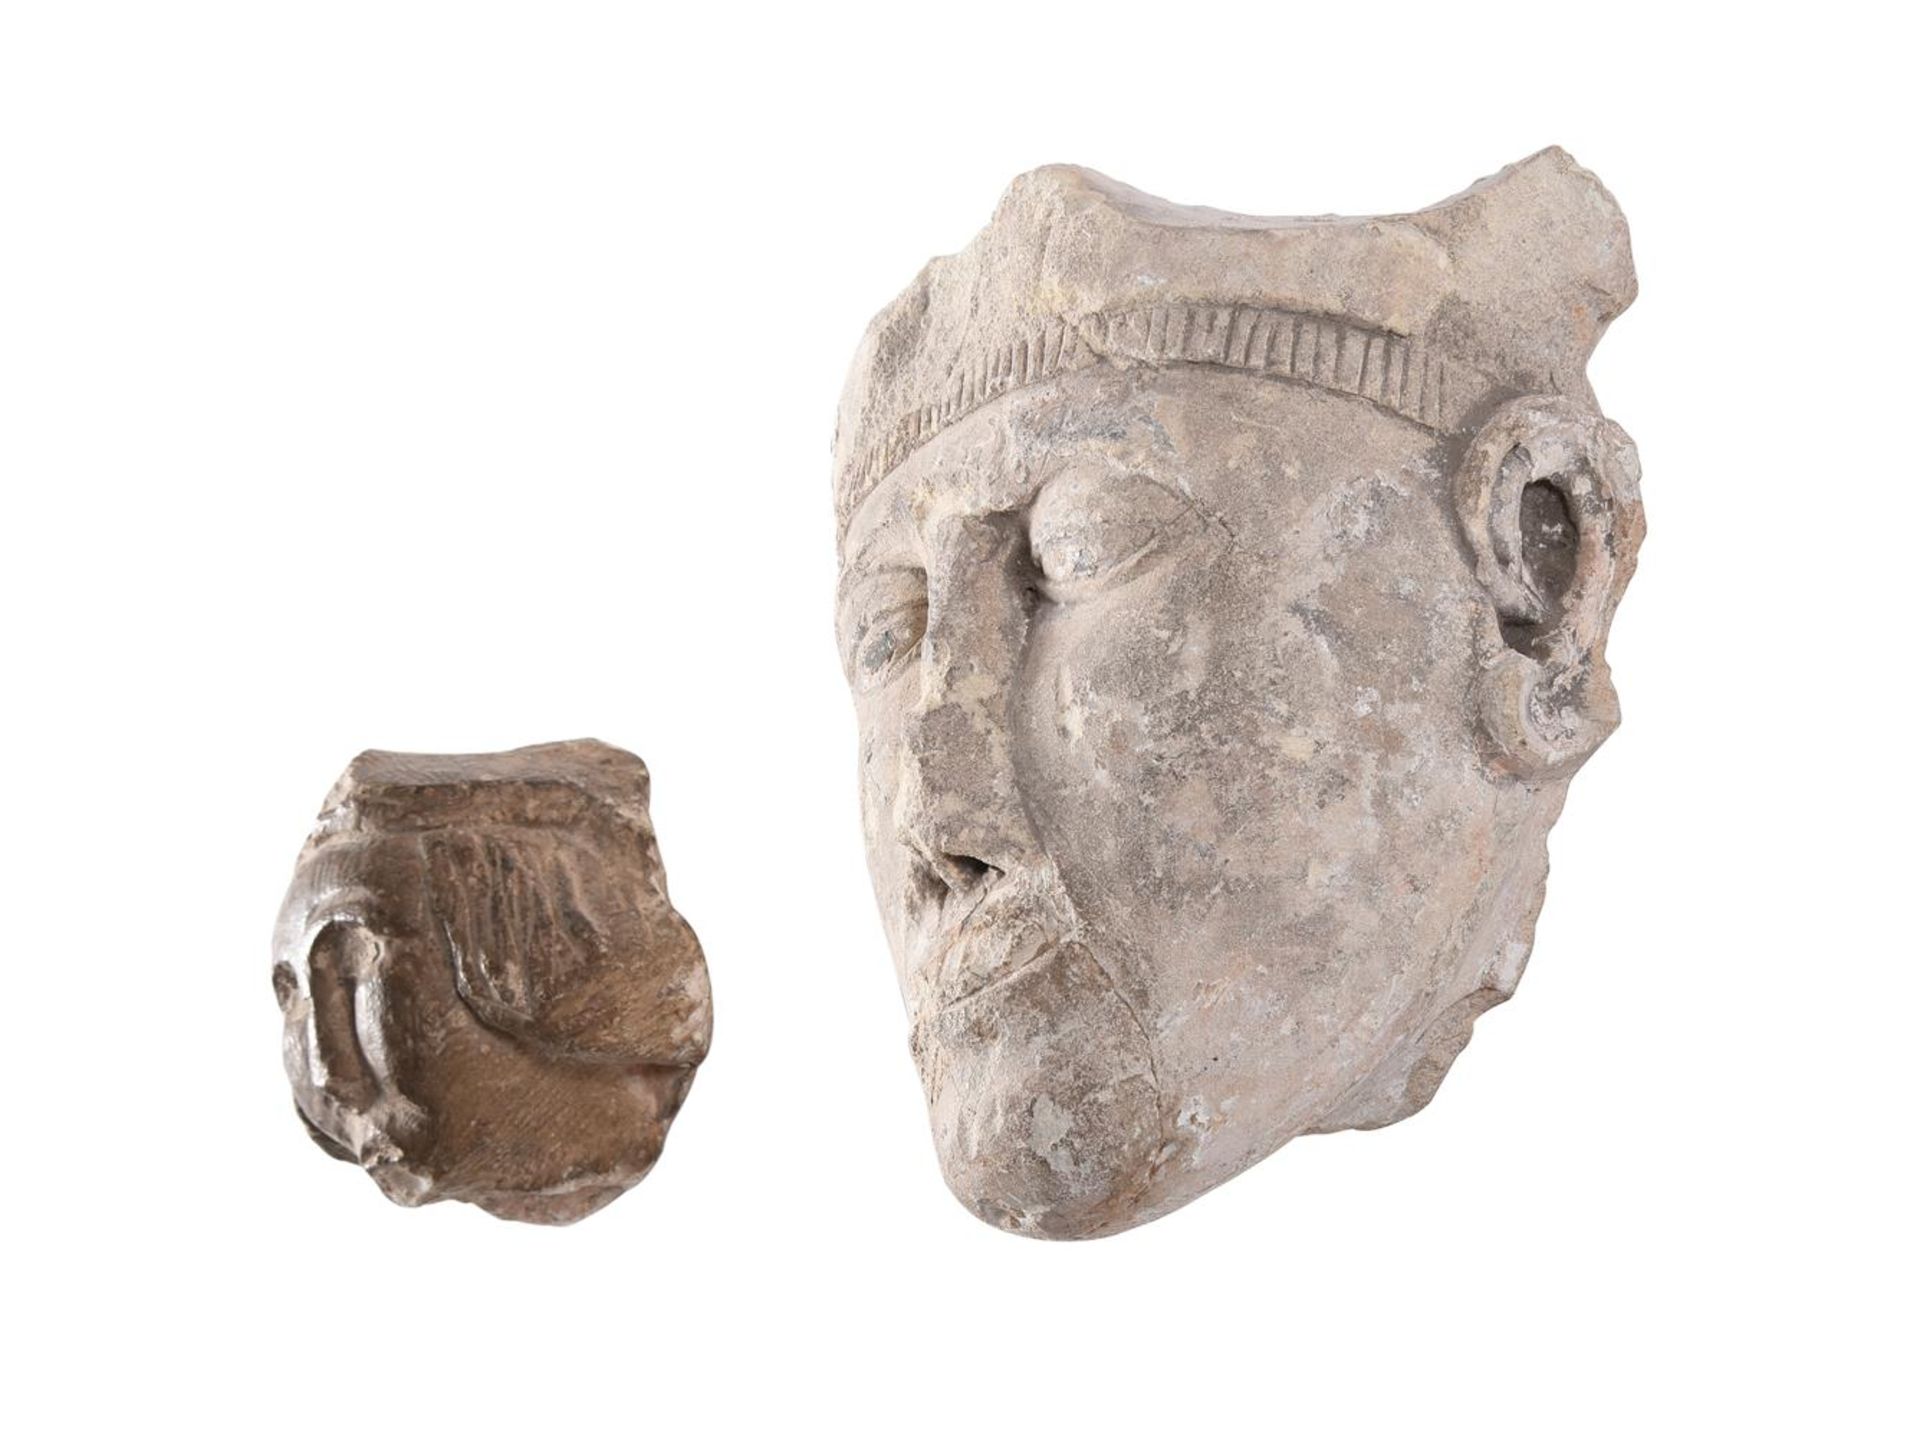 TWO FRAGMENTARY CARVED STONE HEADS, PROBABLY 11TH-13TH CENTURIES - Image 2 of 5